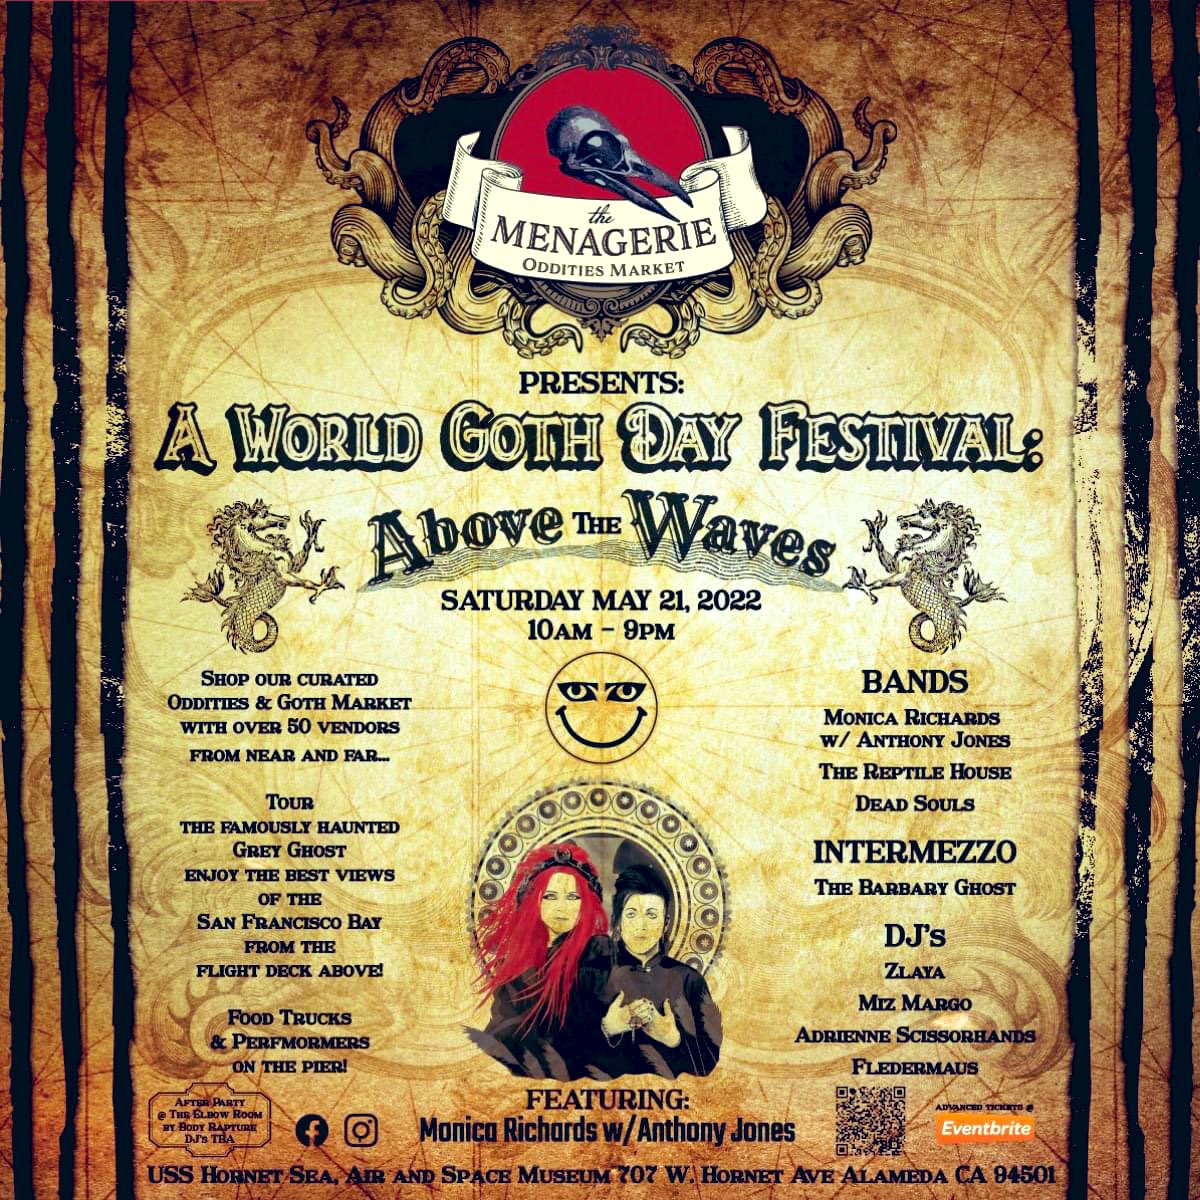 WORLD GOTH DAY FESTIVAL May 21st Alameda, CA Immerse yourself in gothic subculture: art fashion people music 

BUY🎟themenagerieodditiesmarket.com 

#worldgothday #goth #sfgoth #usshornetmuseum